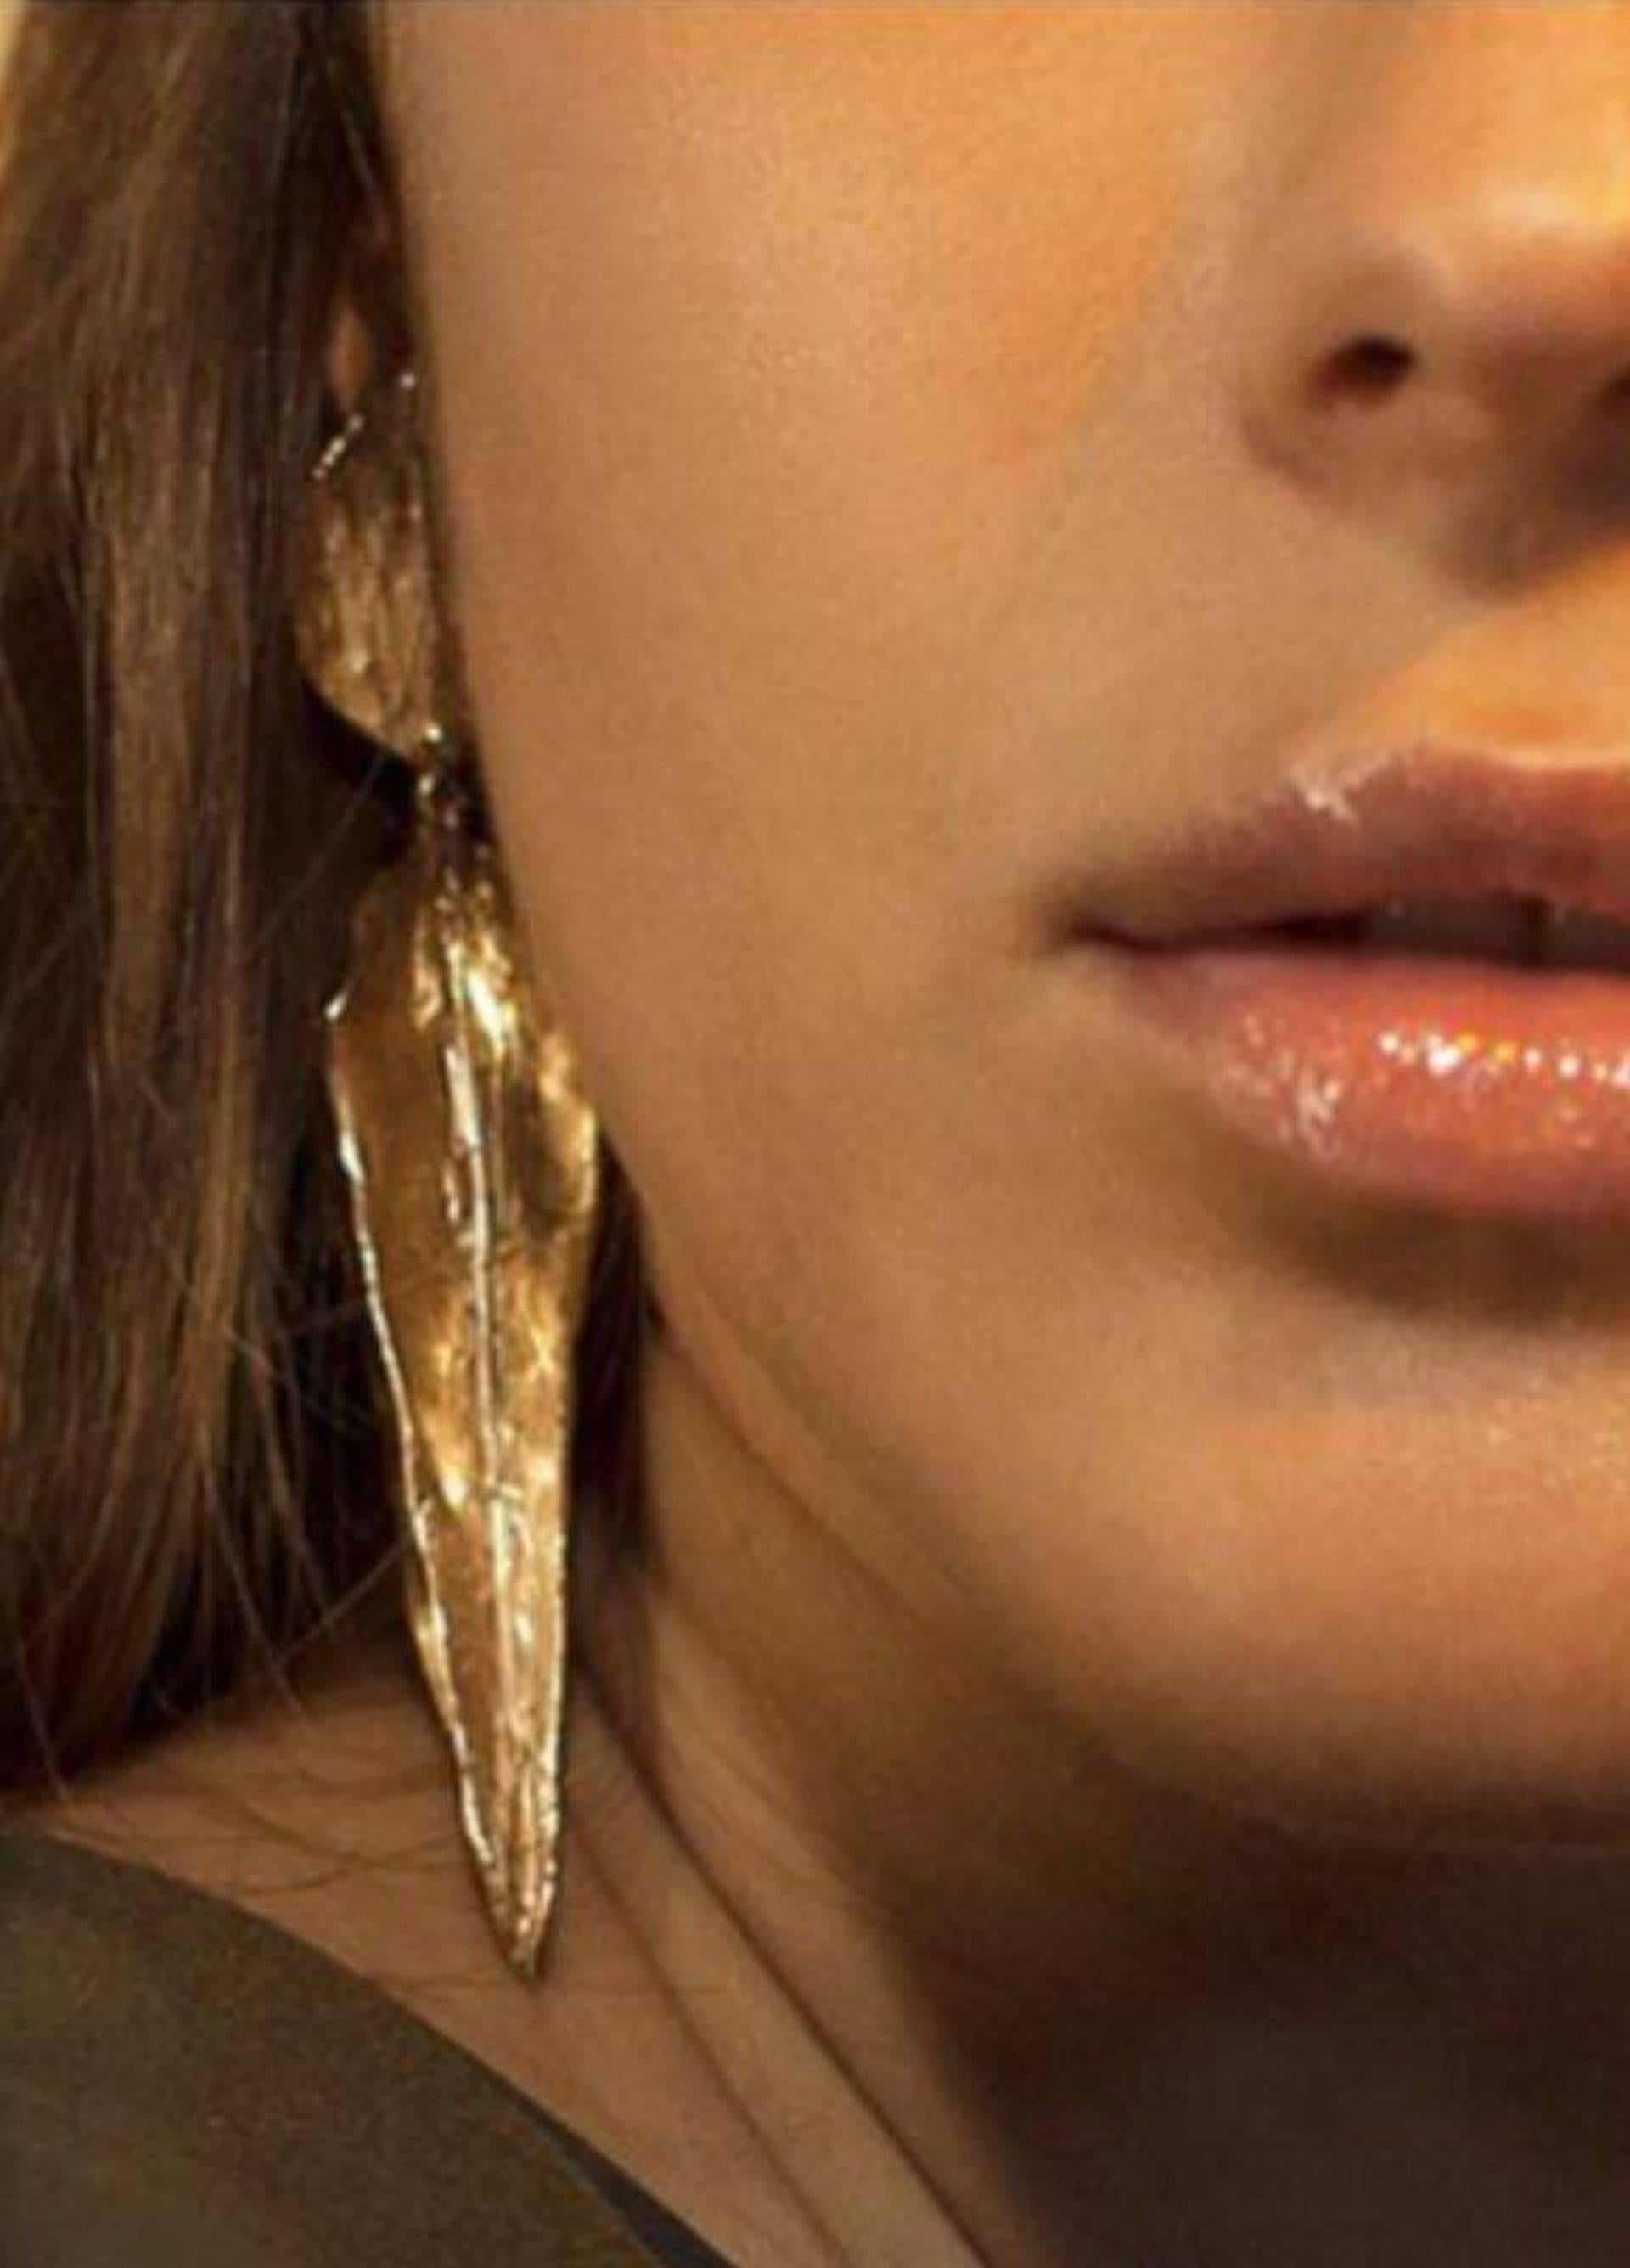 Giulia Barela Arizona Long Gold Plated Bronze Earrings, dipped in 24k gold plated bronze

The composition, surface and attention to detail is what makes these jewels enchanting. Giulia Barela's creativity derives from her eye for traditional fabrics